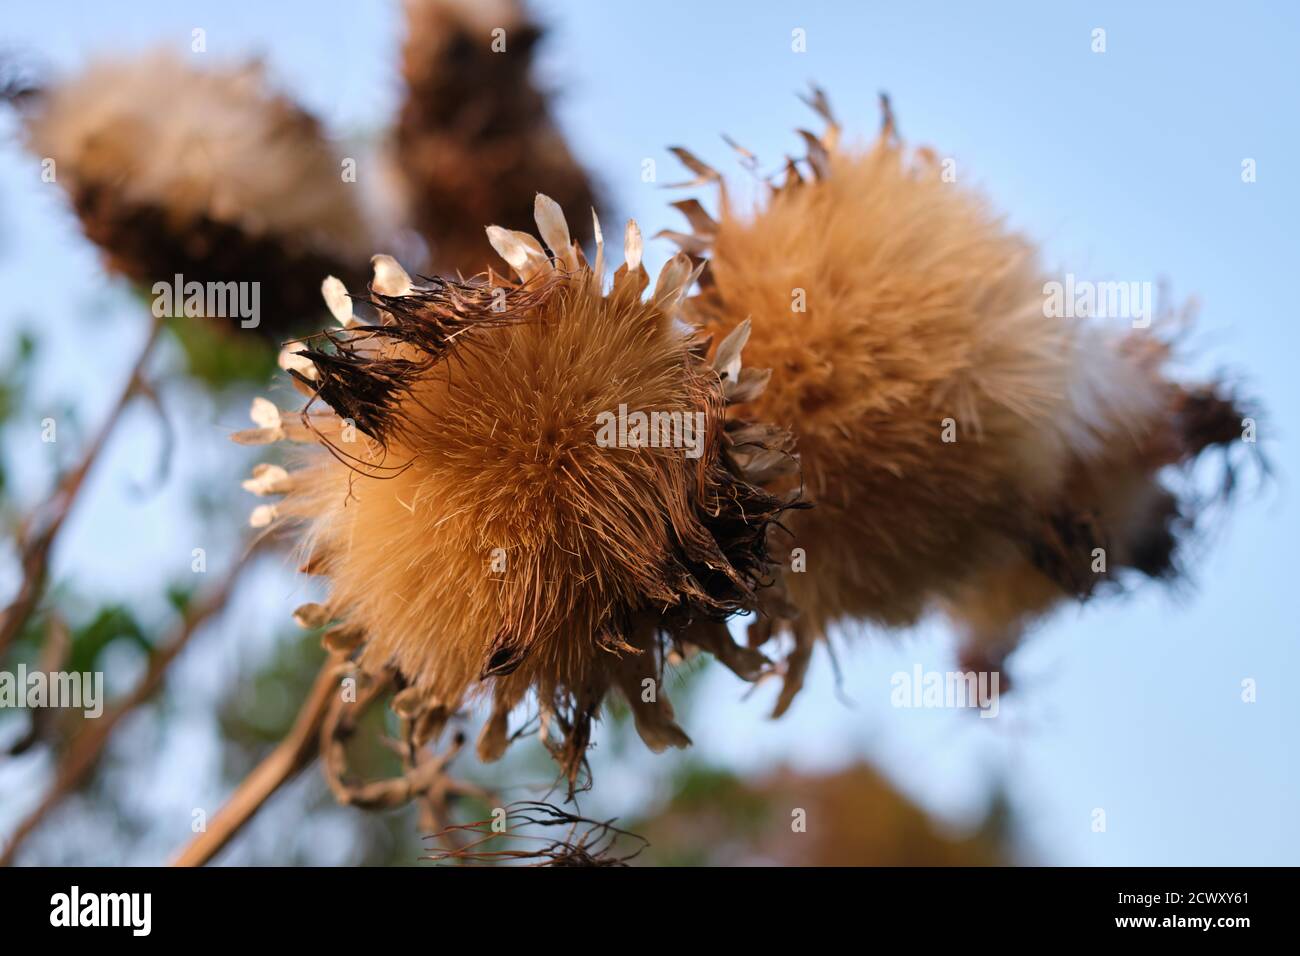 Close-up of fluffy hairy furry dried thistle weed plant Stock Photo